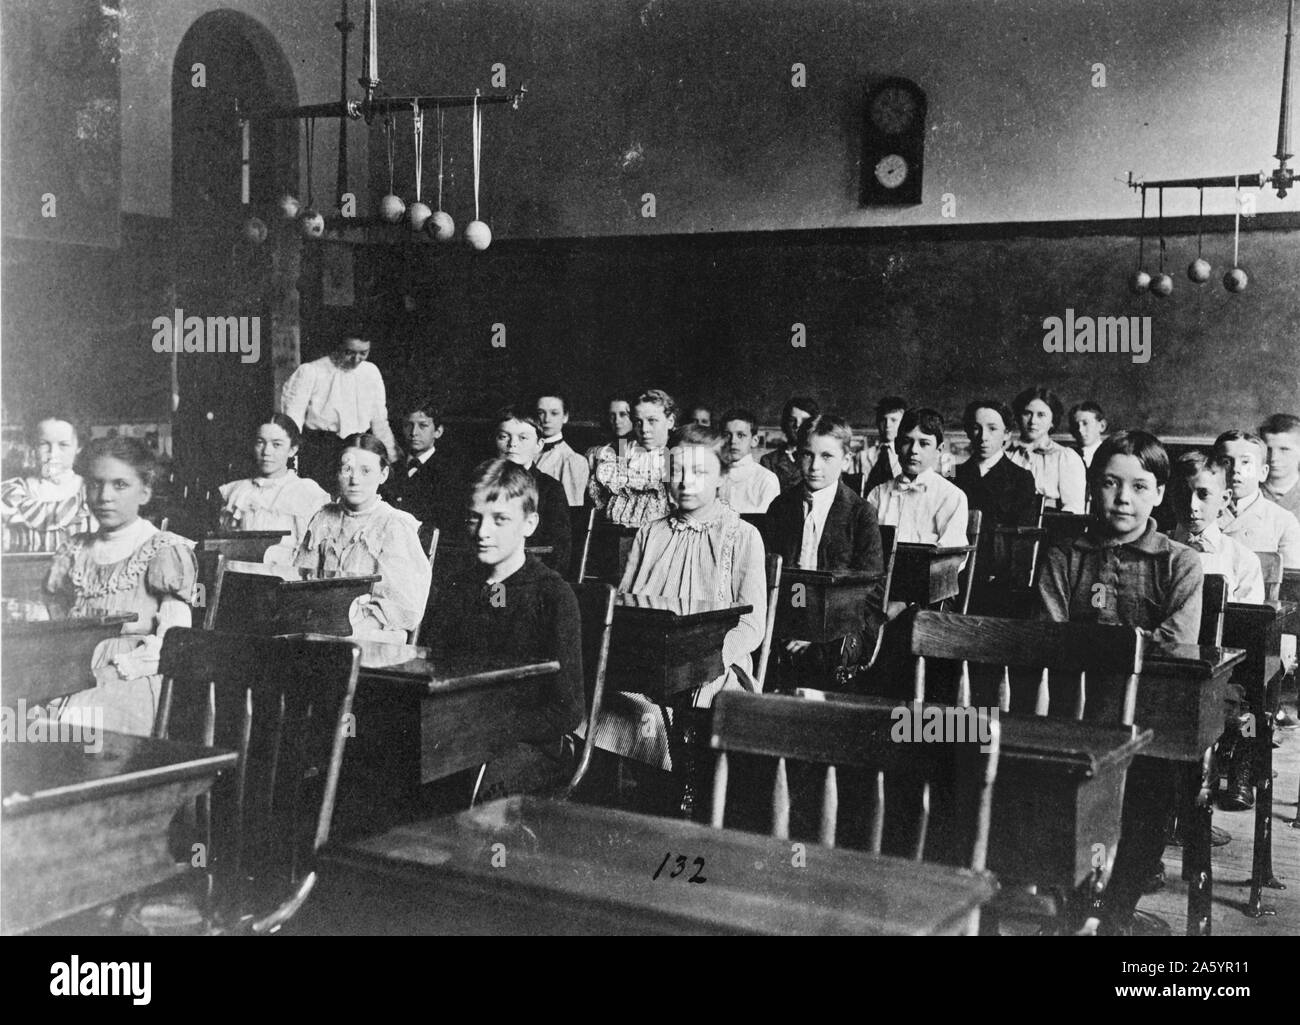 Co educational class Black and White Stock Photos & Images - Alamy